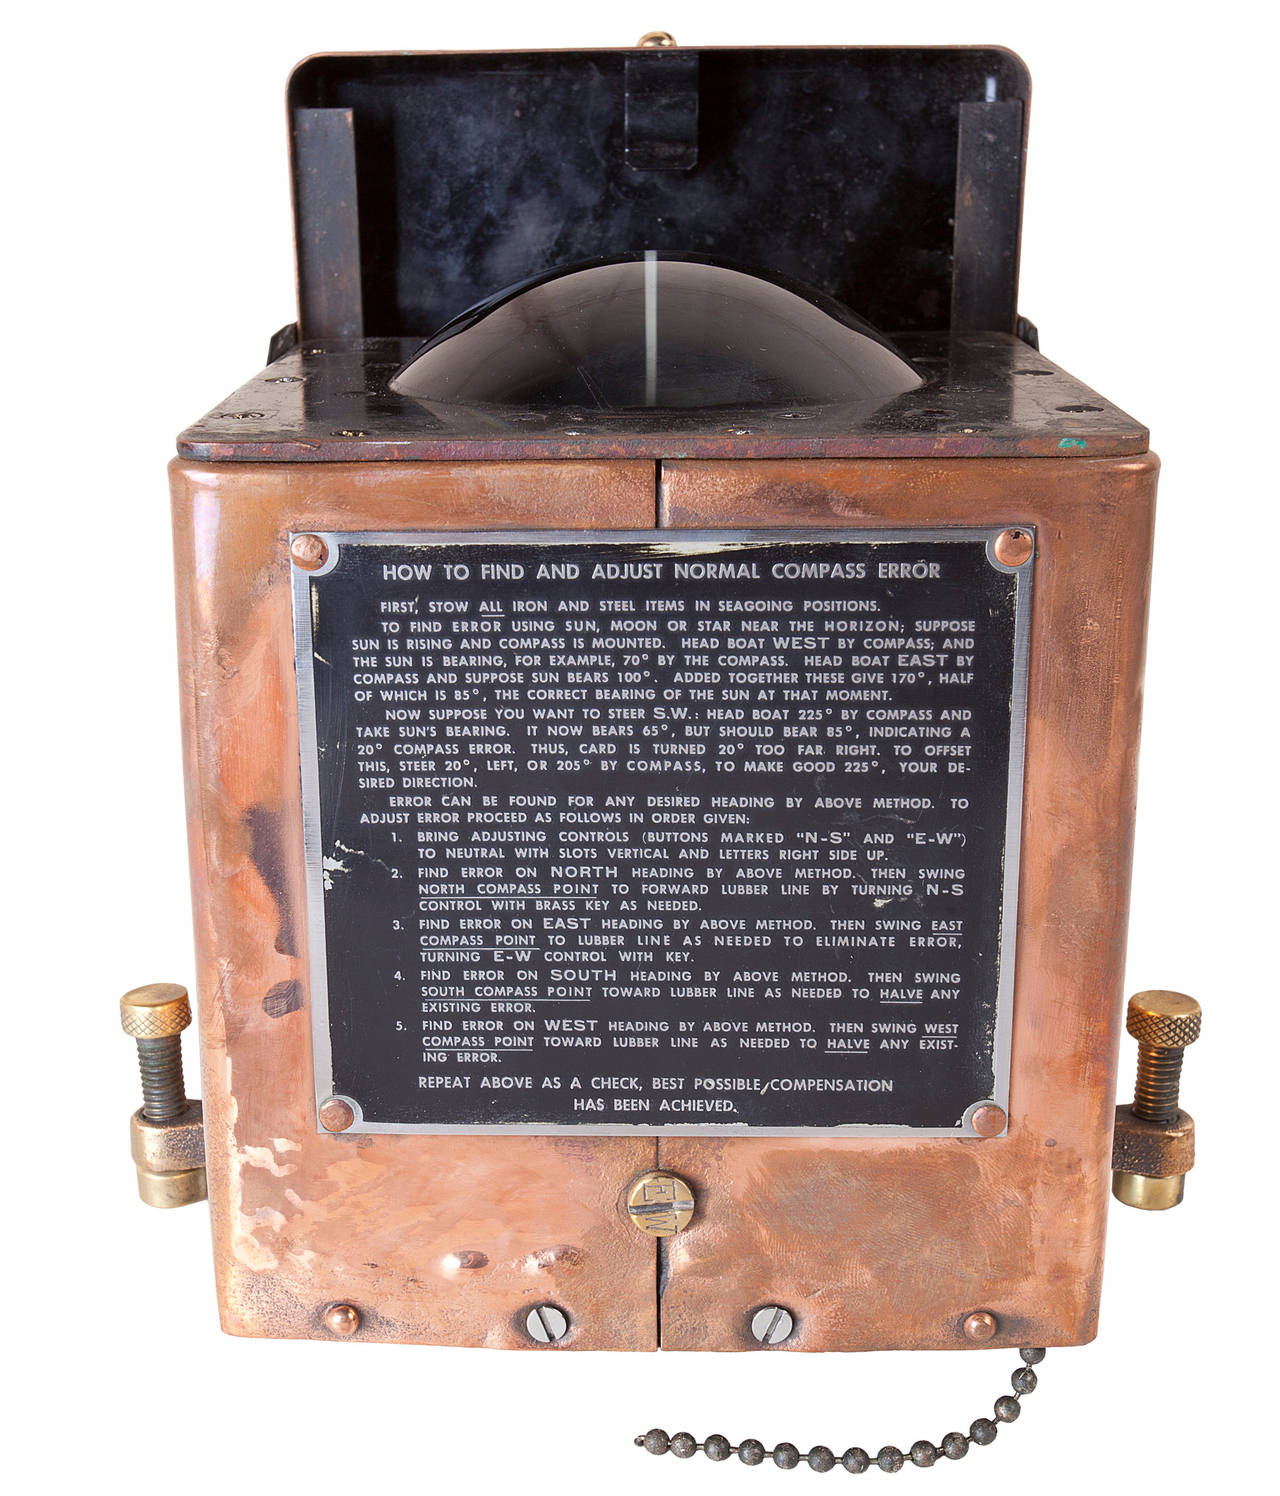 A working copper compass from an American Ship's lifeboat. The lid closes to protect it from the elements and the original plaque is still mounted on the front face of the box, mid-century.

Nautical antiques and Artifacts, located on Nantucket.